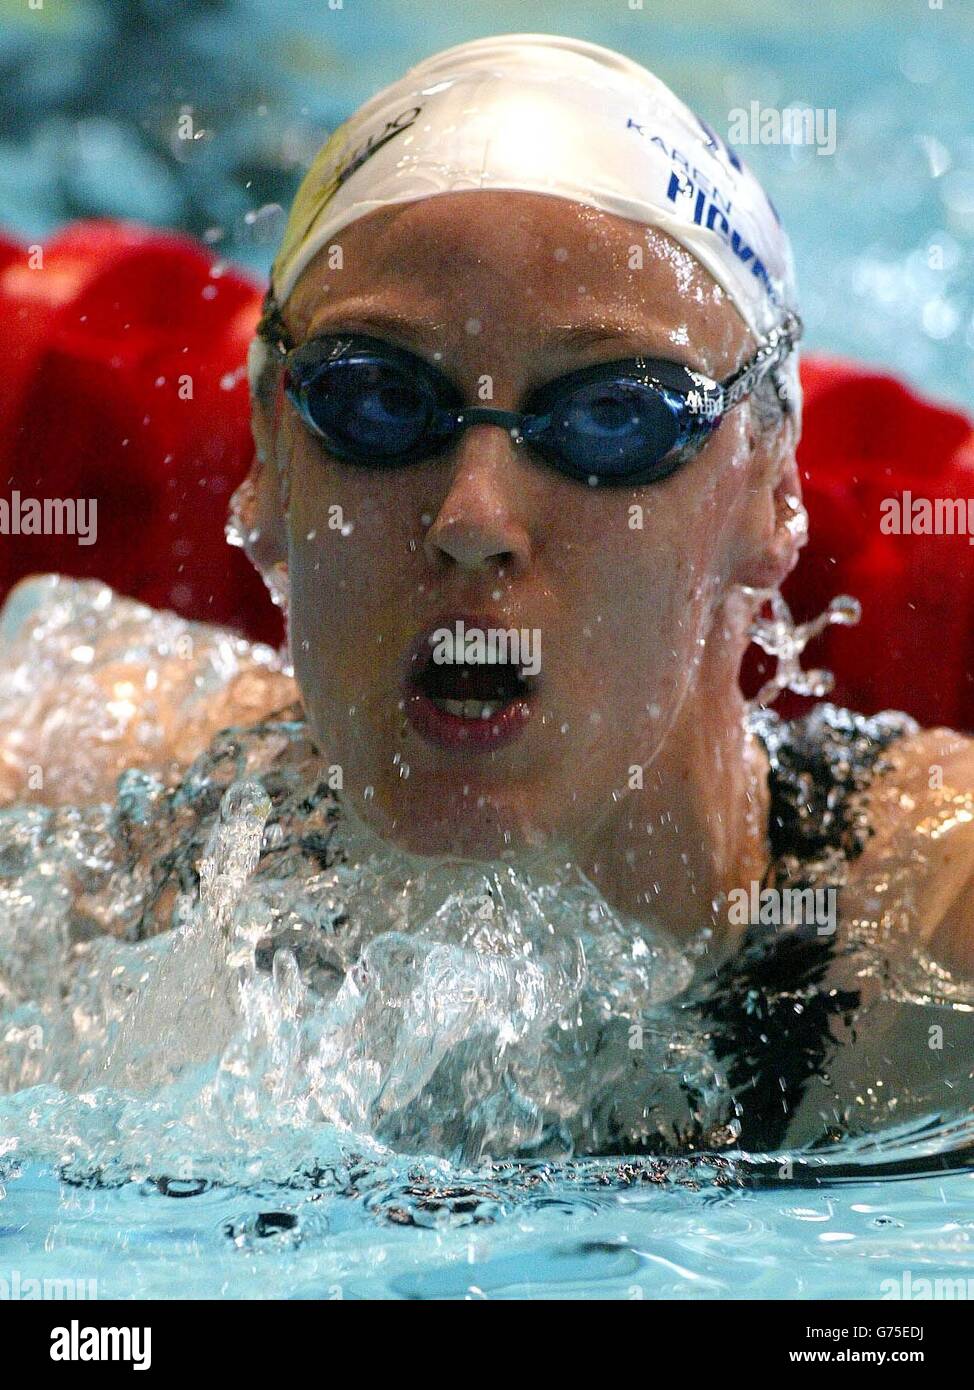 Great Britain's Karen Pickering after winning her heat of the 200m freestyle at the Commonwealth Games swimming trials, Aquatics Centre, Manchester. Stock Photo